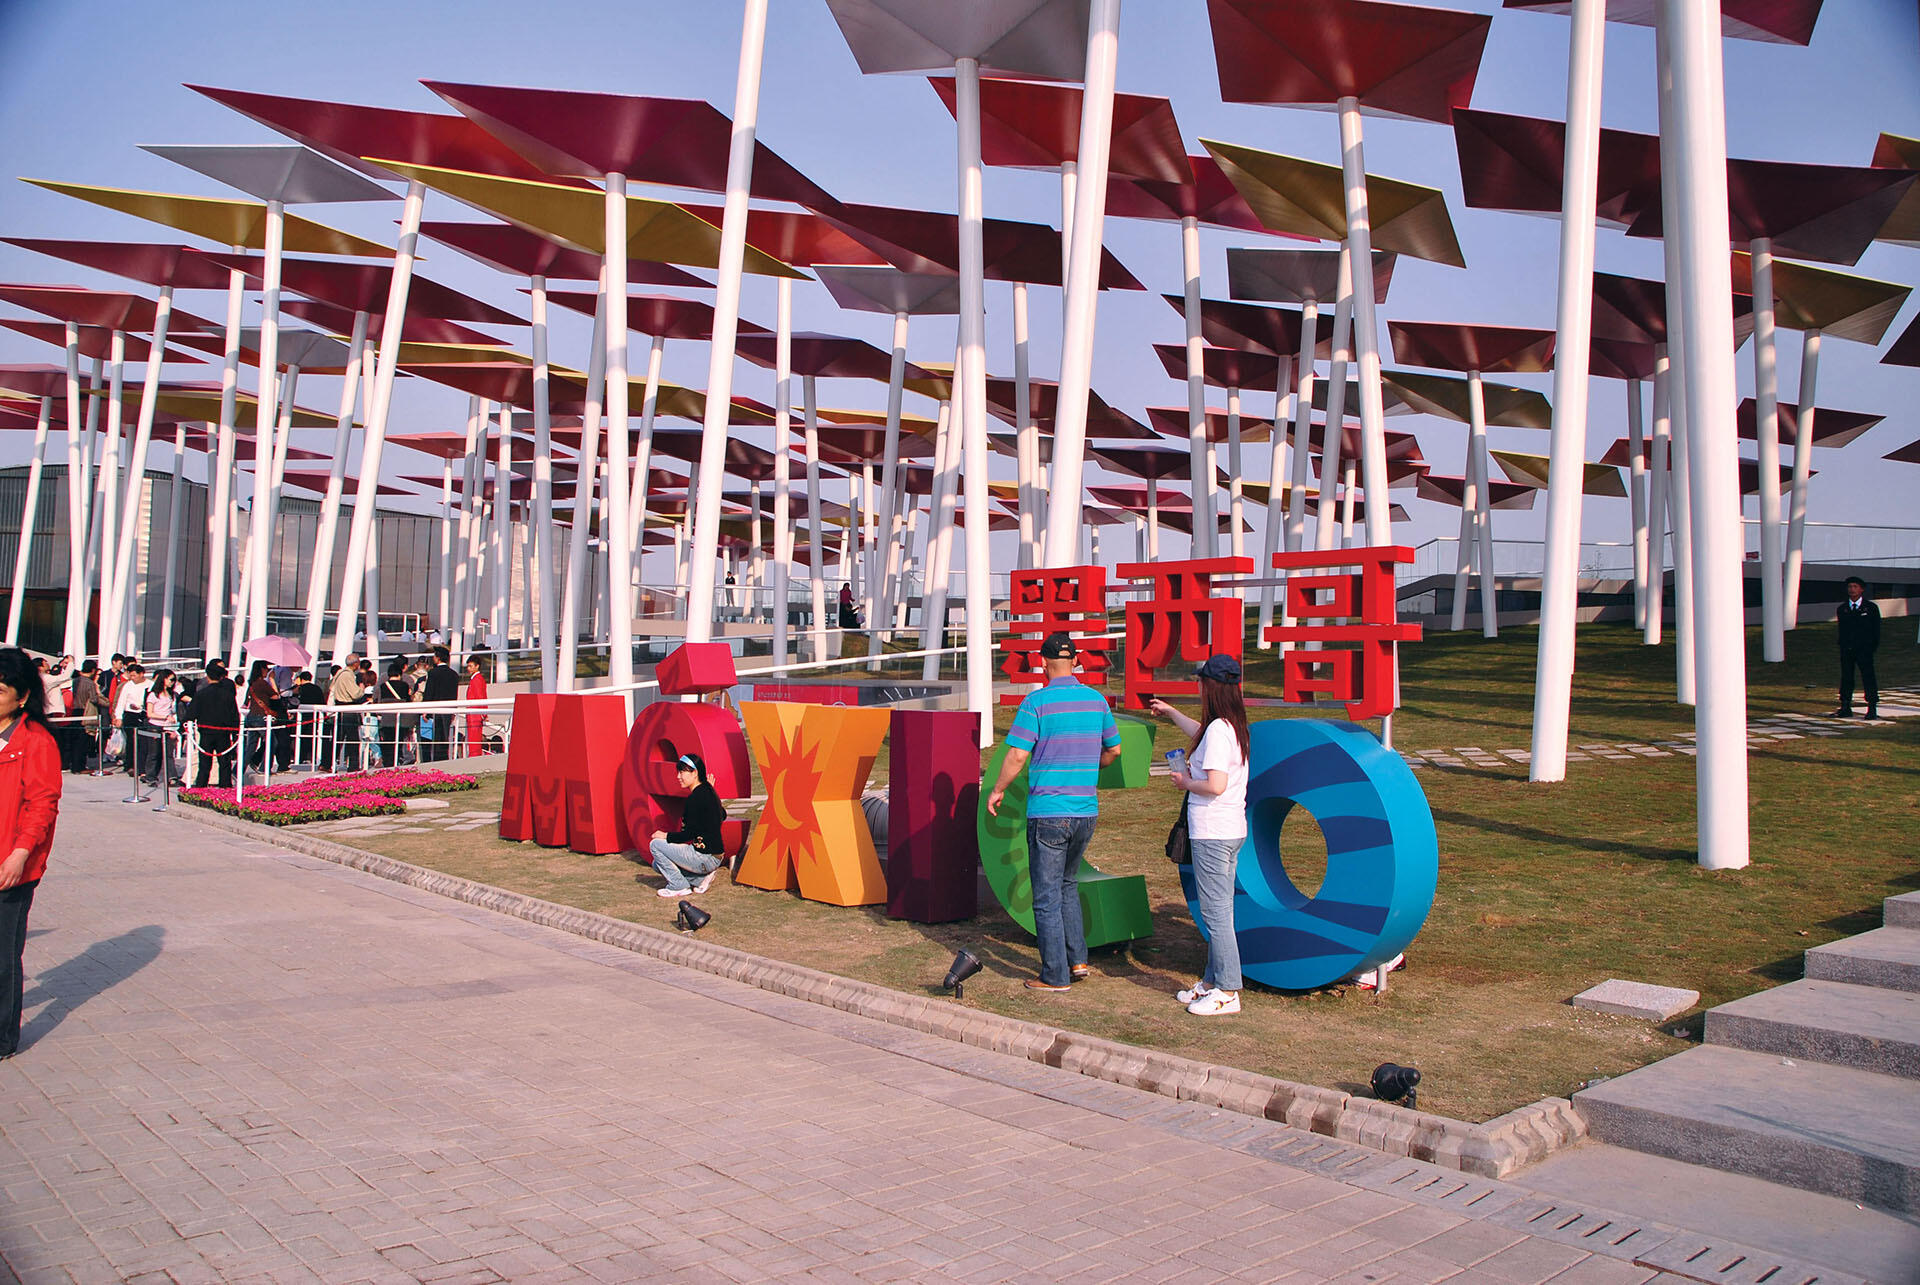 The colorful Mexico Pavilion at Shanghai’s World Expo, 2010. (Photo by © Virginia & Josh — TwoFatBellies.com.)